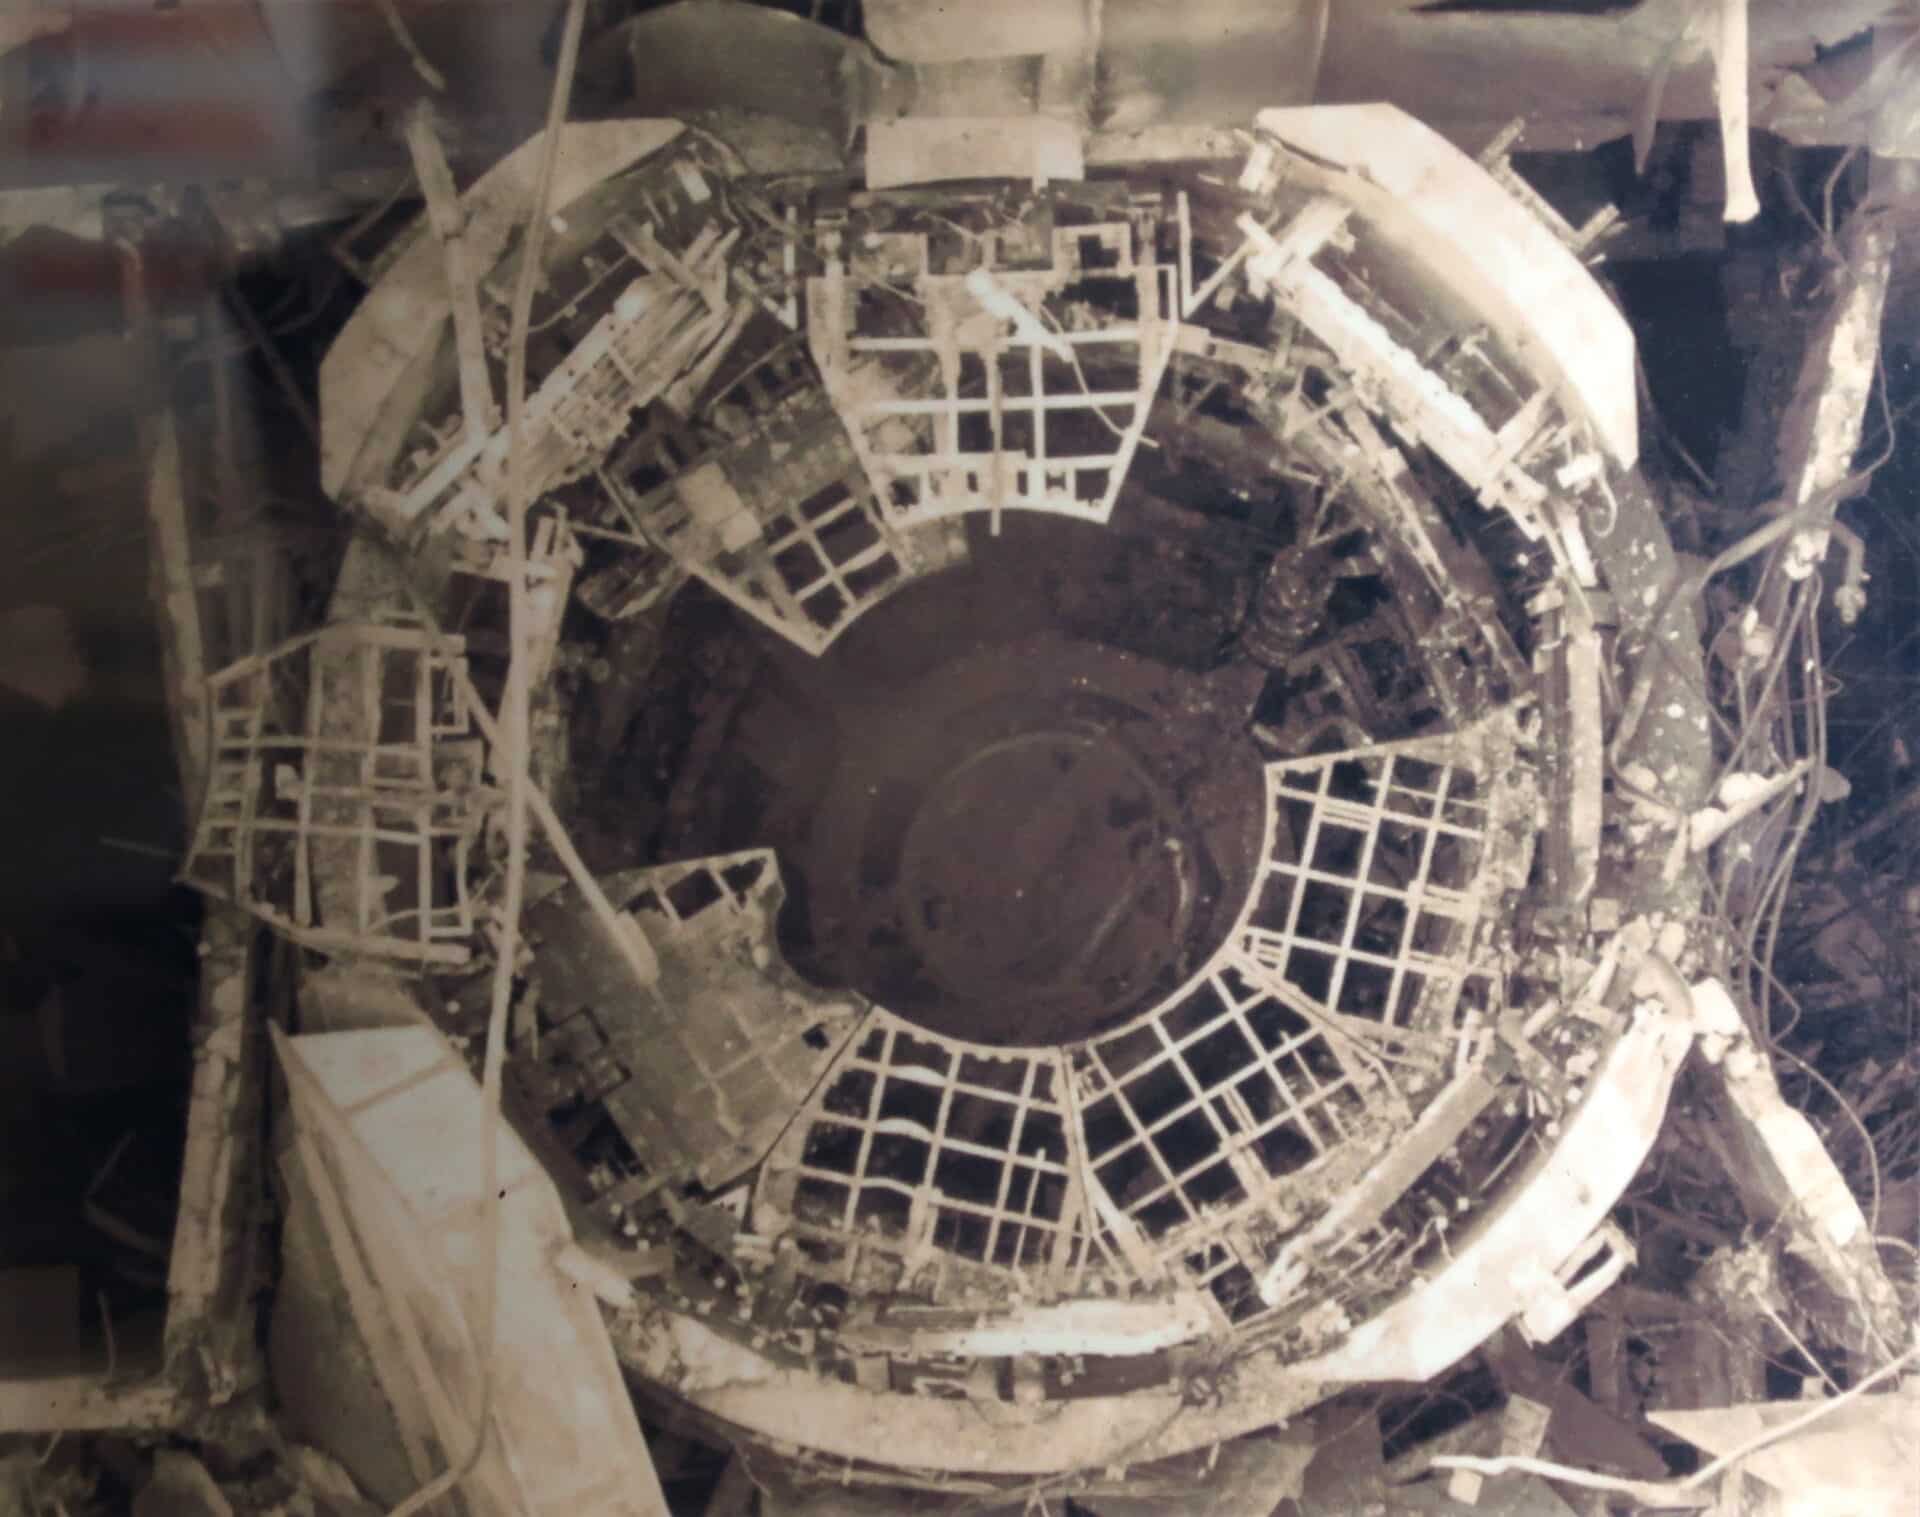 The Titan II missile silo in Damascus, Arkansas after the September 19, 1980 explosion. (Kelly Michal / Flickr CC BY-NC)